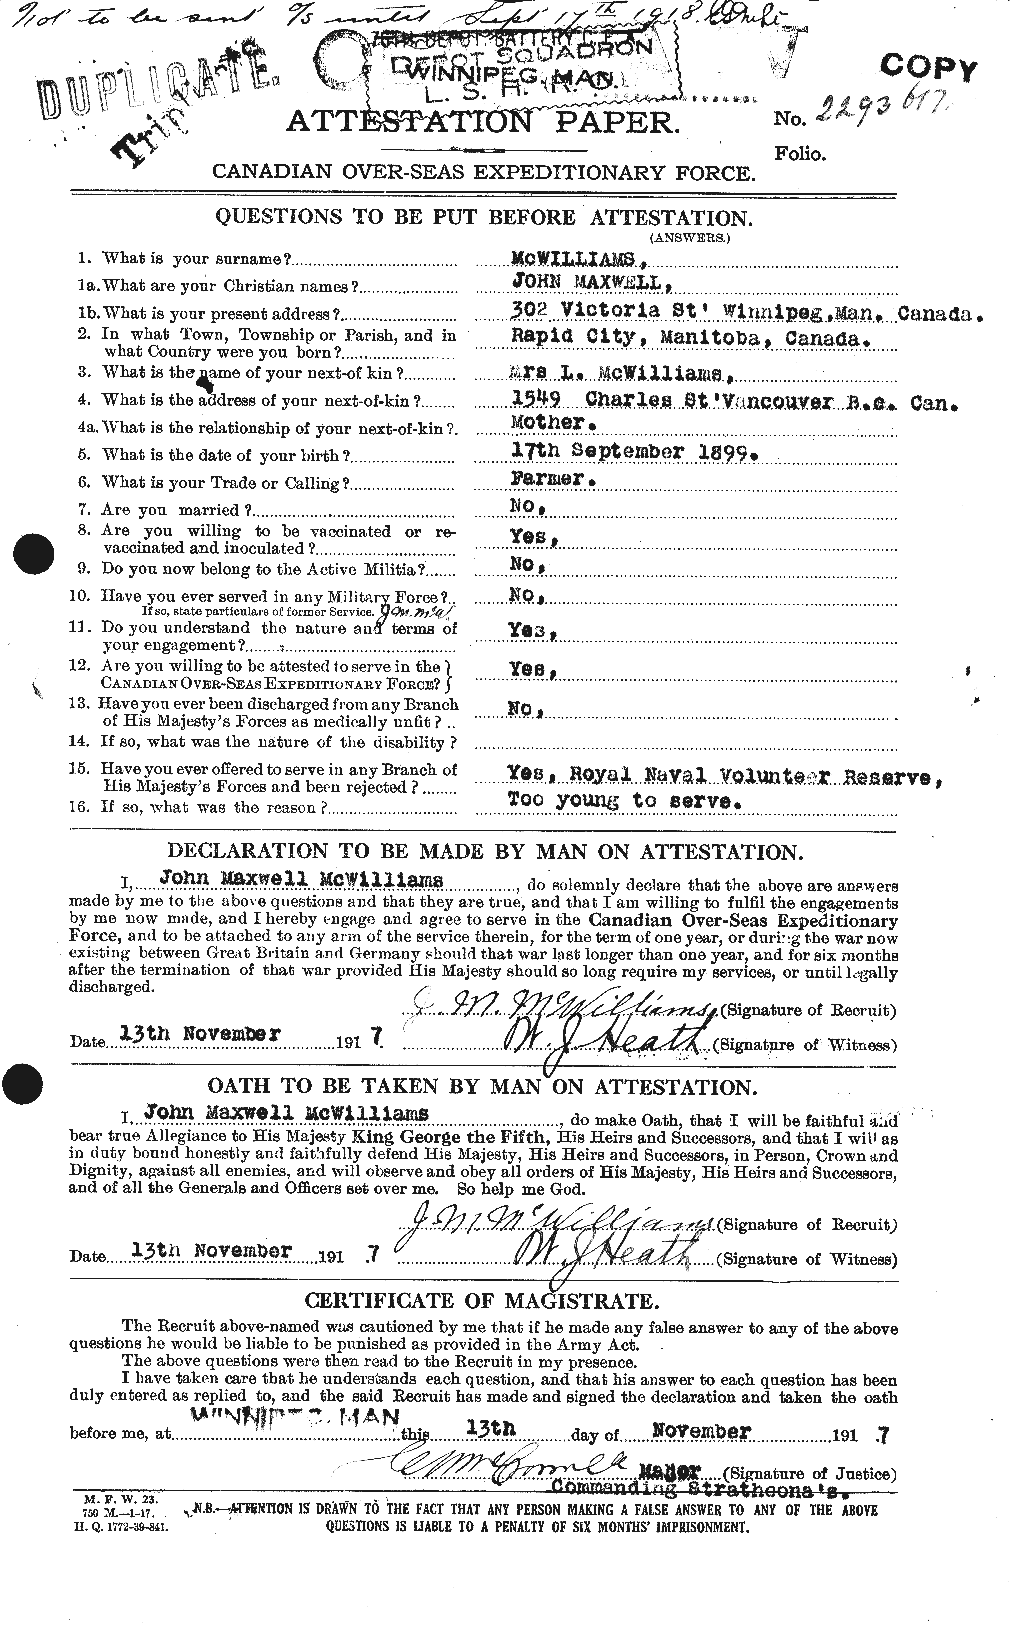 Personnel Records of the First World War - CEF 549626a